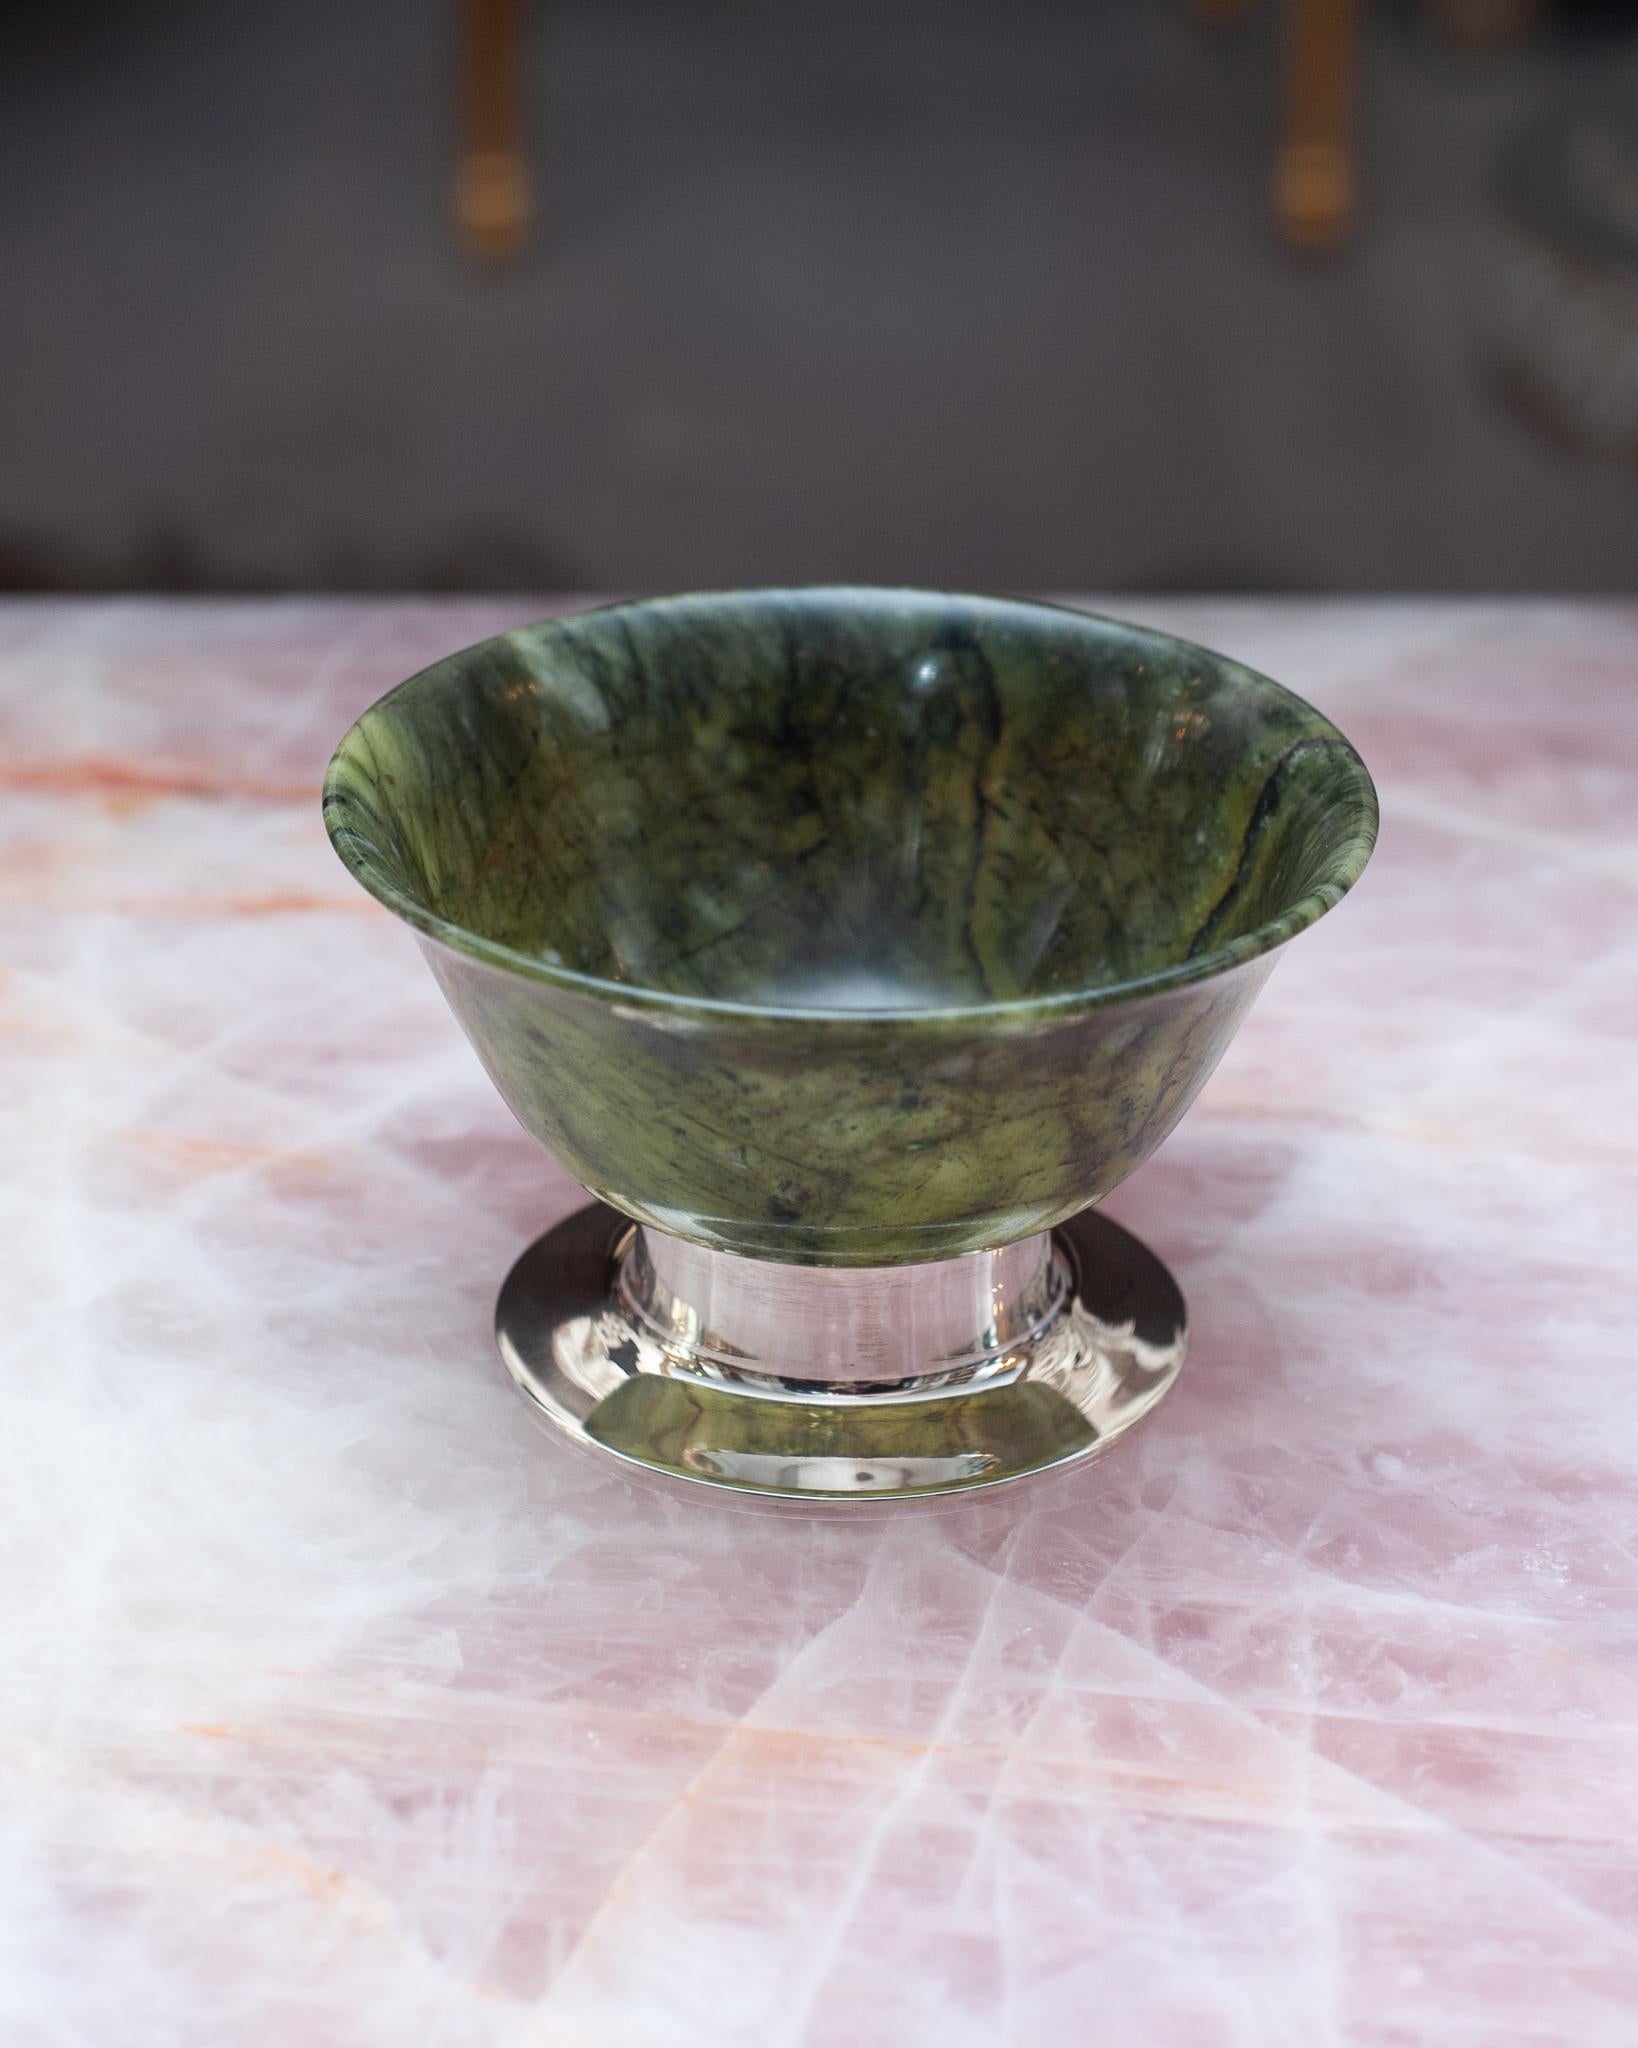 A stunning fine jade bowl on a handmade 925 sterling silver base. Expertly crafted by a master jeweller in Porto, Portugal.